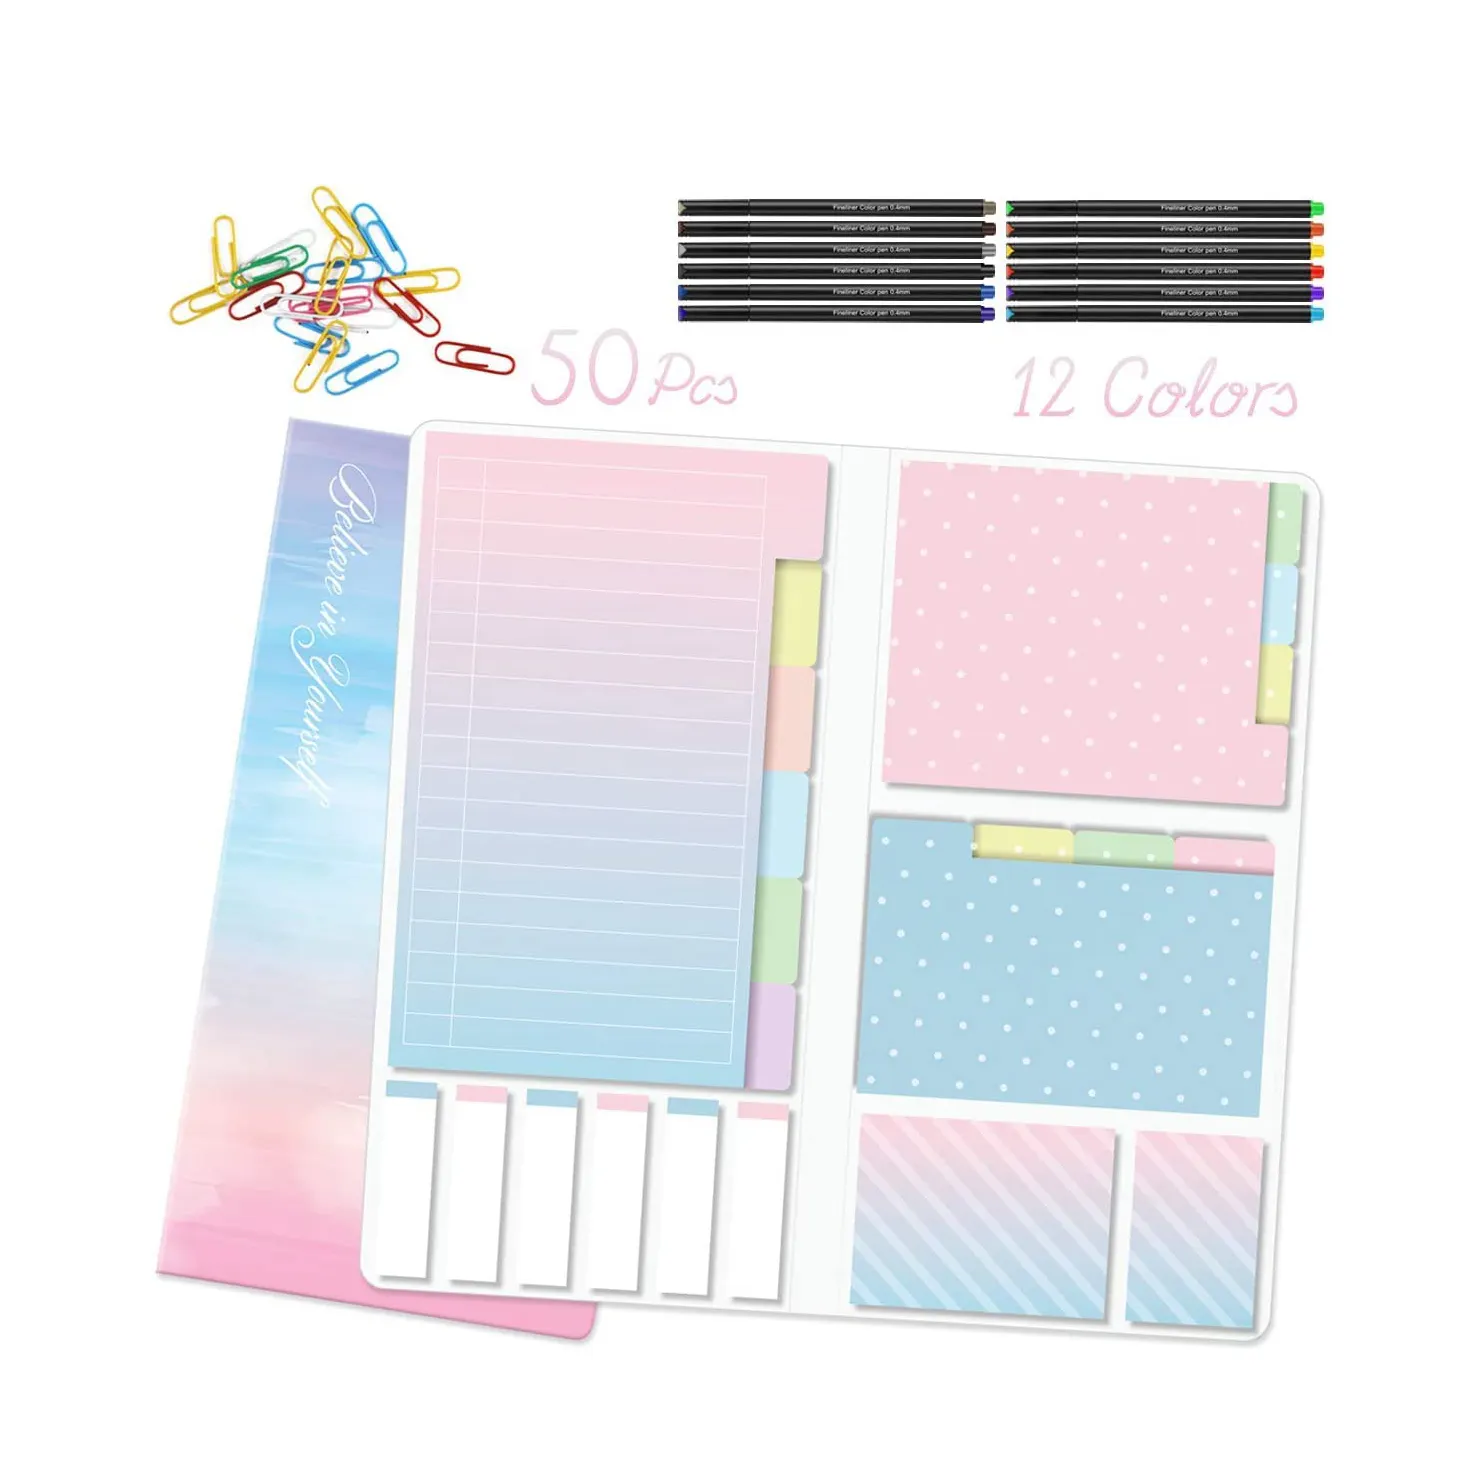 Divider Sticky Notes Tab Set Divider Sticky Notes with Bookmark Index for Study